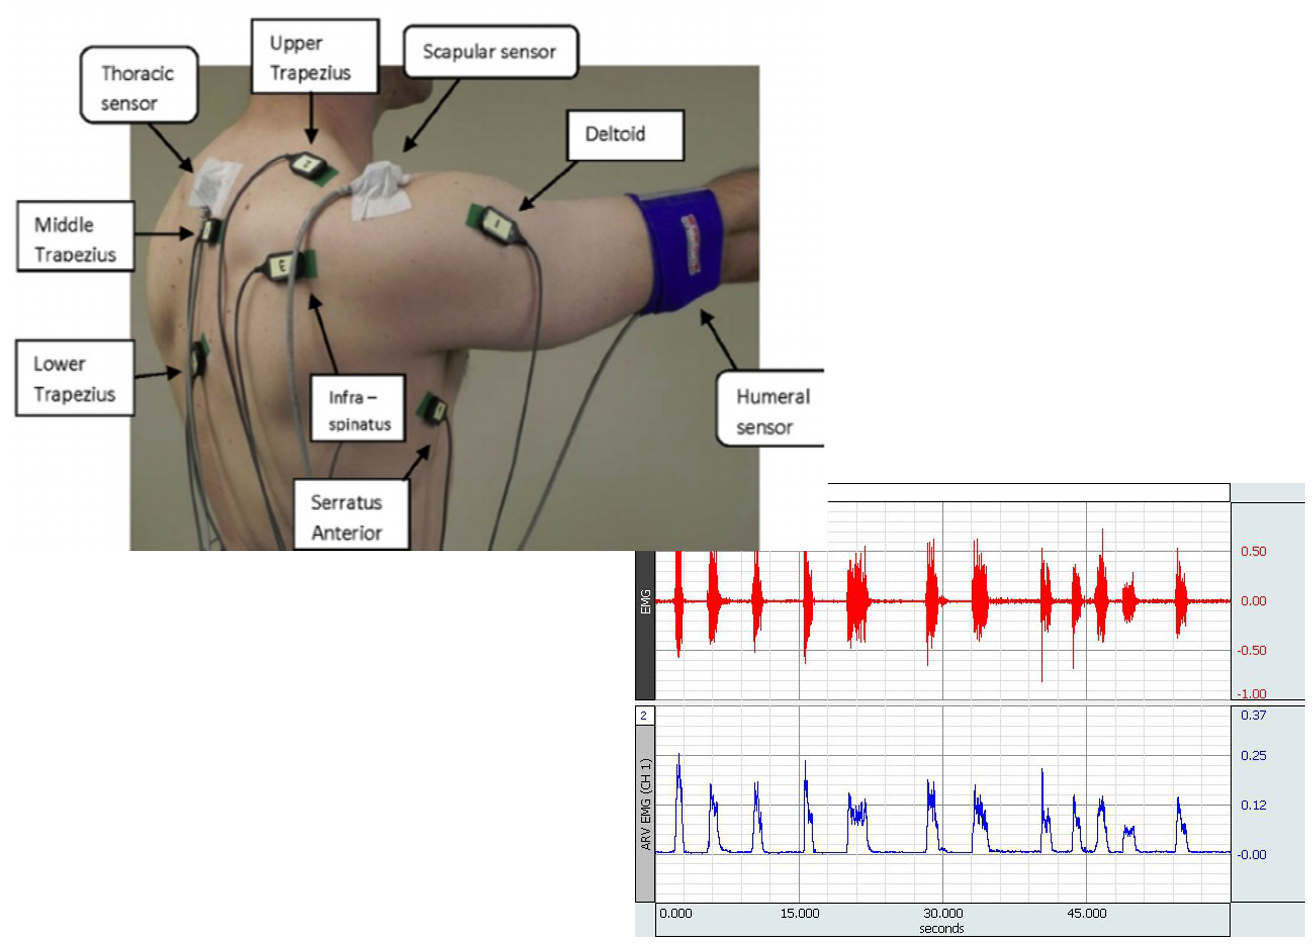 An image illustrating specific EMG electrode locations on an adult human male.